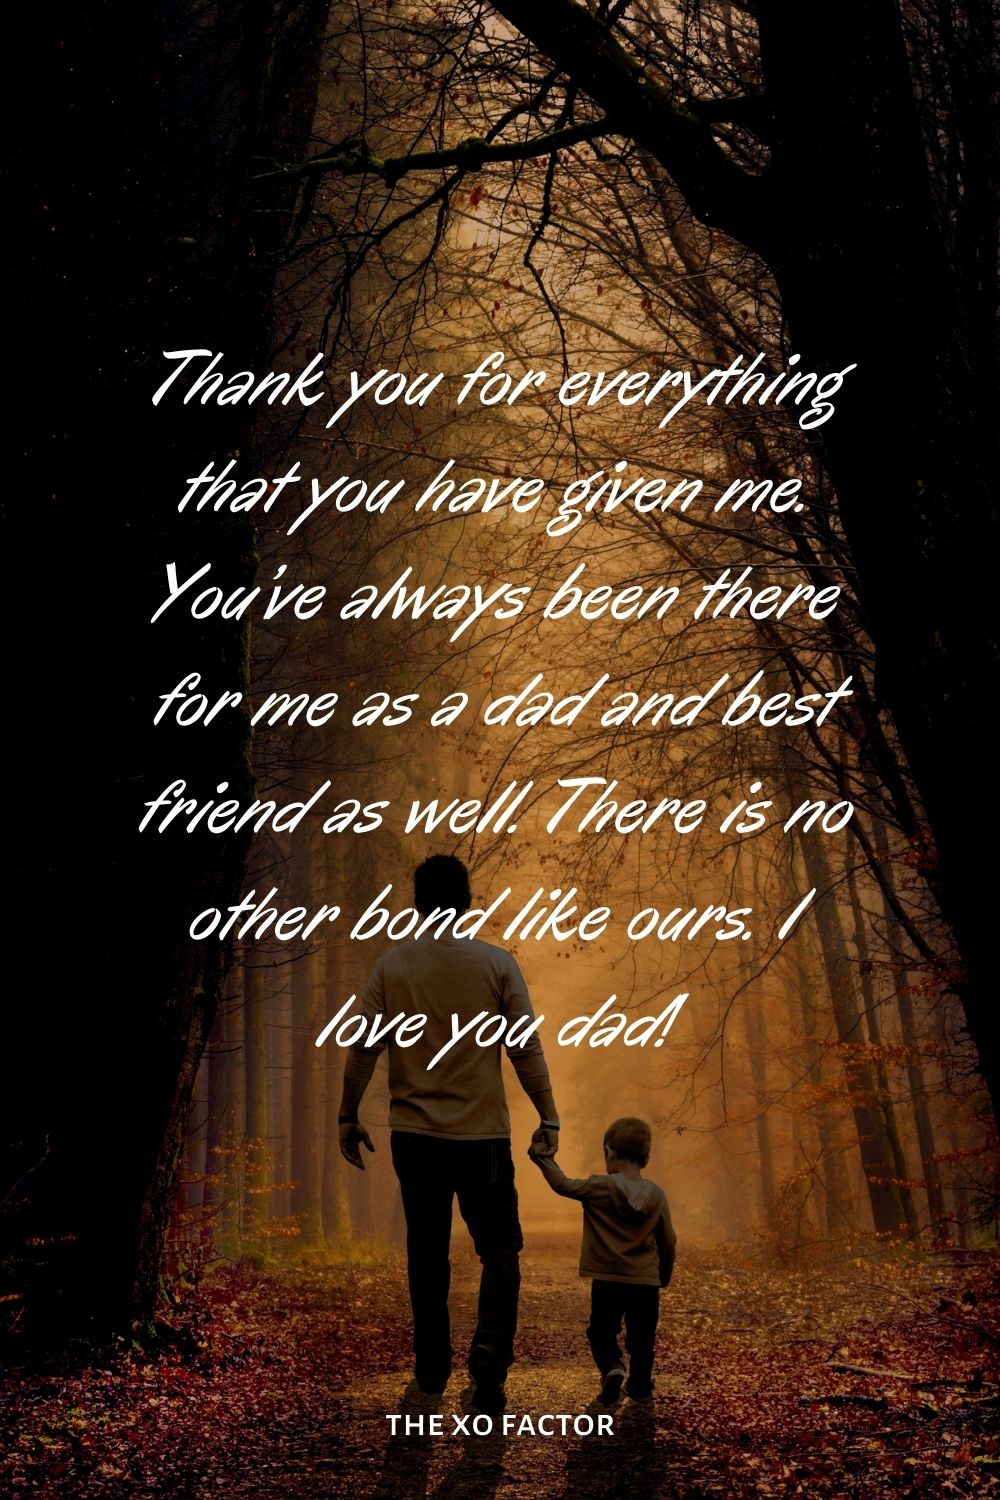 Thank you for everything that you have given me. You’ve always been there for me as a dad and best friend as well. There is no other bond like ours. I love you dad!